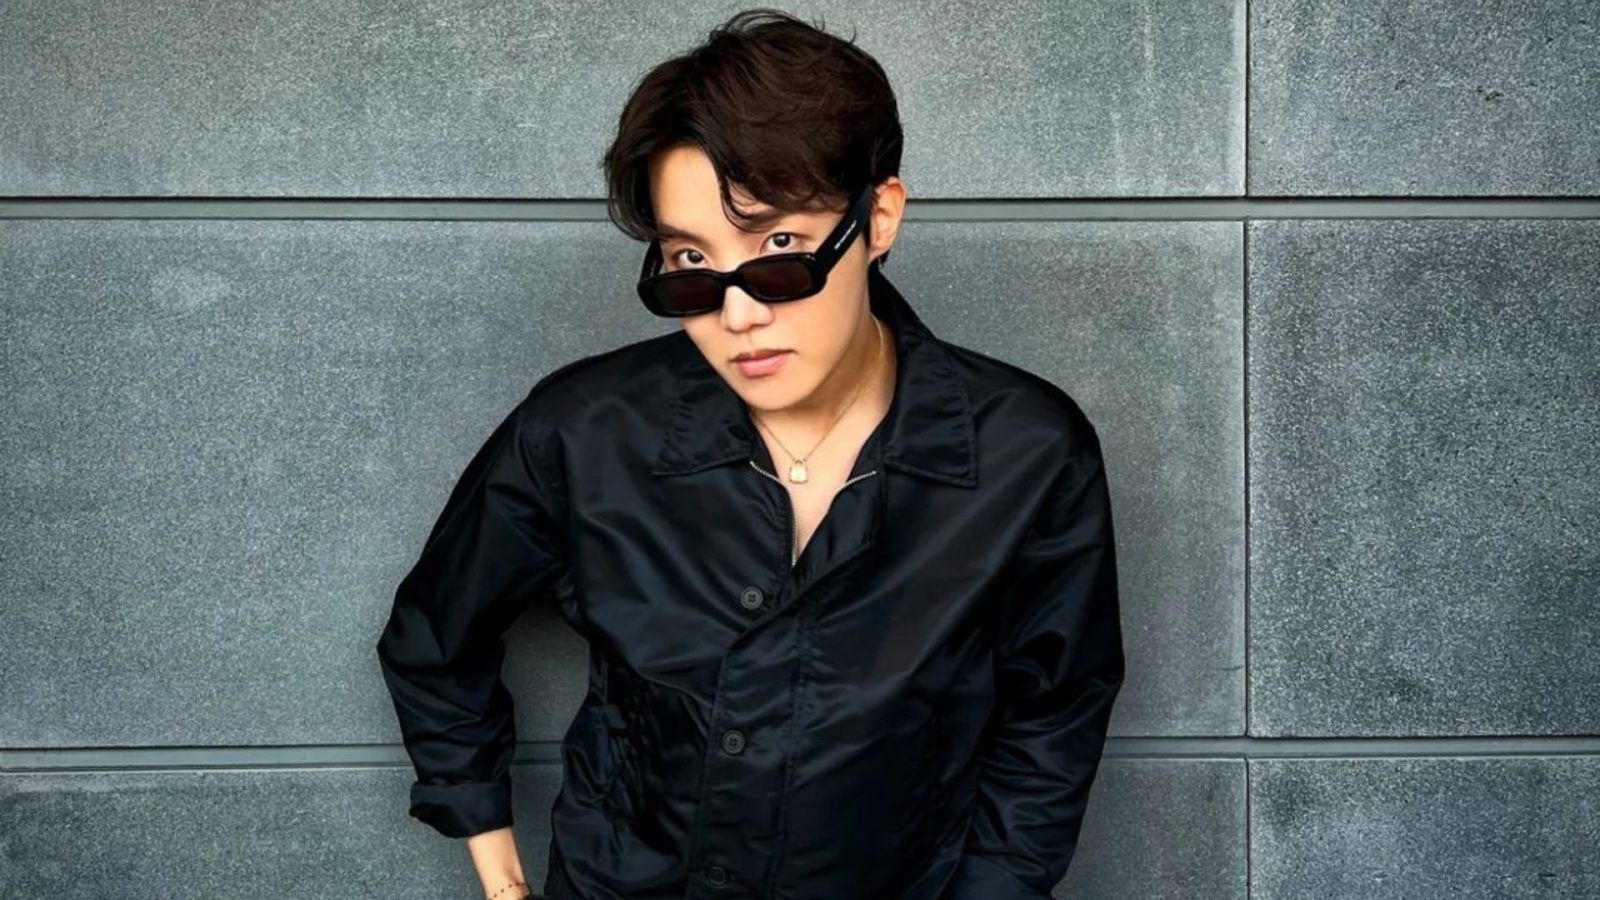 BTS Member J-Hope is the Face of Louis Vuitton Keepall Collection